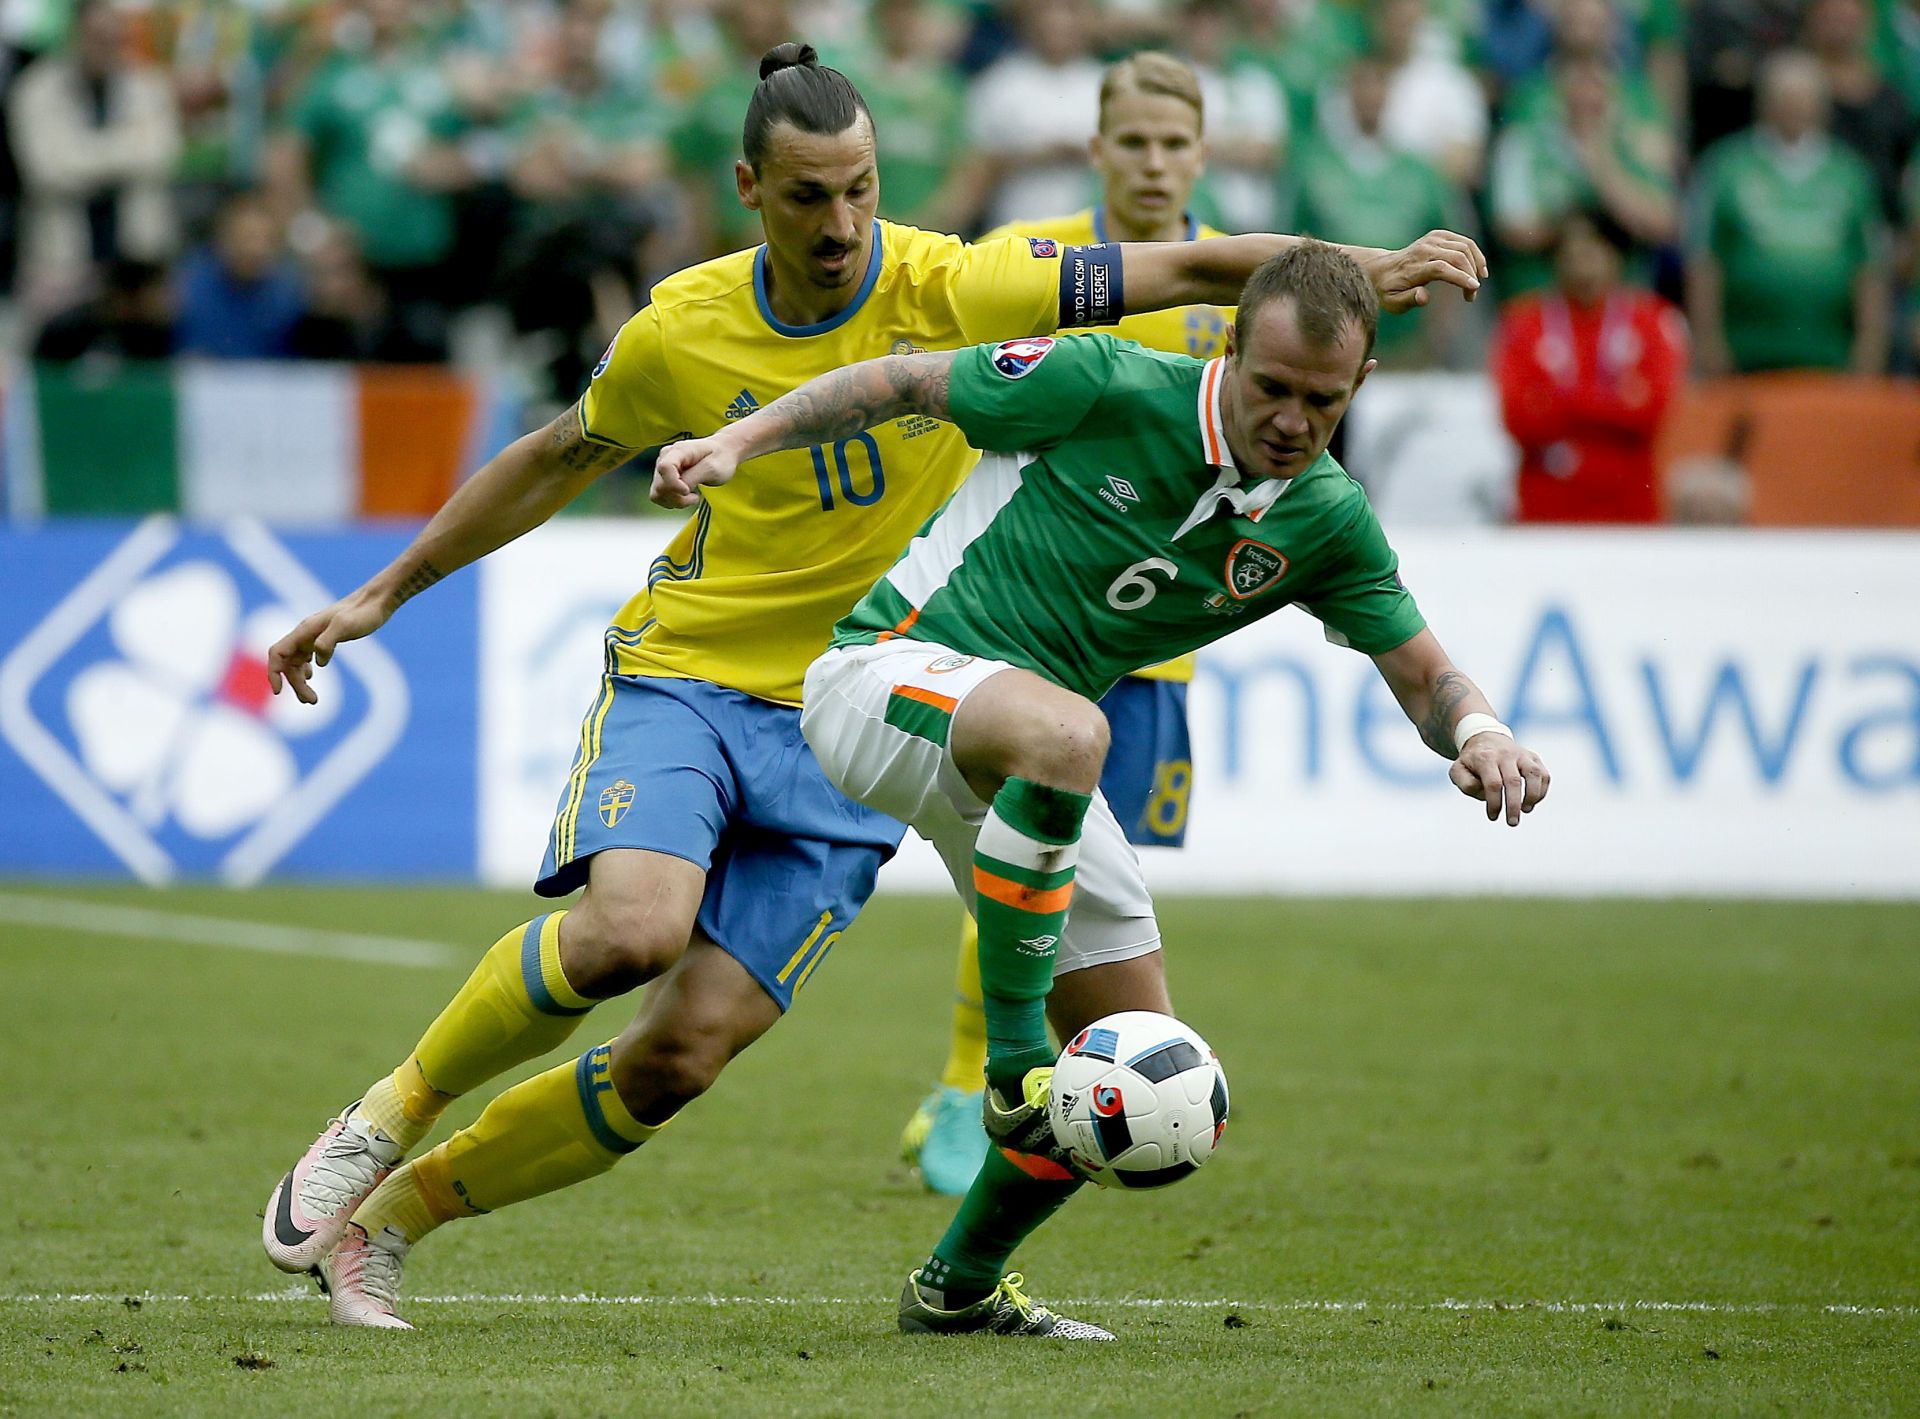 epa05362326 Zlatan Ibrahimovic of Sweden (L) and Glenn Whelan of Ireland in action during the UEFA EURO 2016 group E preliminary round match between Ireland and Sweden at Stade de France in Saint-Denis, France, 13 June 2016.

(RESTRICTIONS APPLY: For editorial news reporting purposes only. Not used for commercial or marketing purposes without prior written approval of UEFA. Images must appear as still images and must not emulate match action video footage. Photographs published in online publications (whether via the Internet or otherwise) shall have an interval of at least 20 seconds between the posting.)  EPA/ETIENNE LAURENT   EDITORIAL USE ONLY